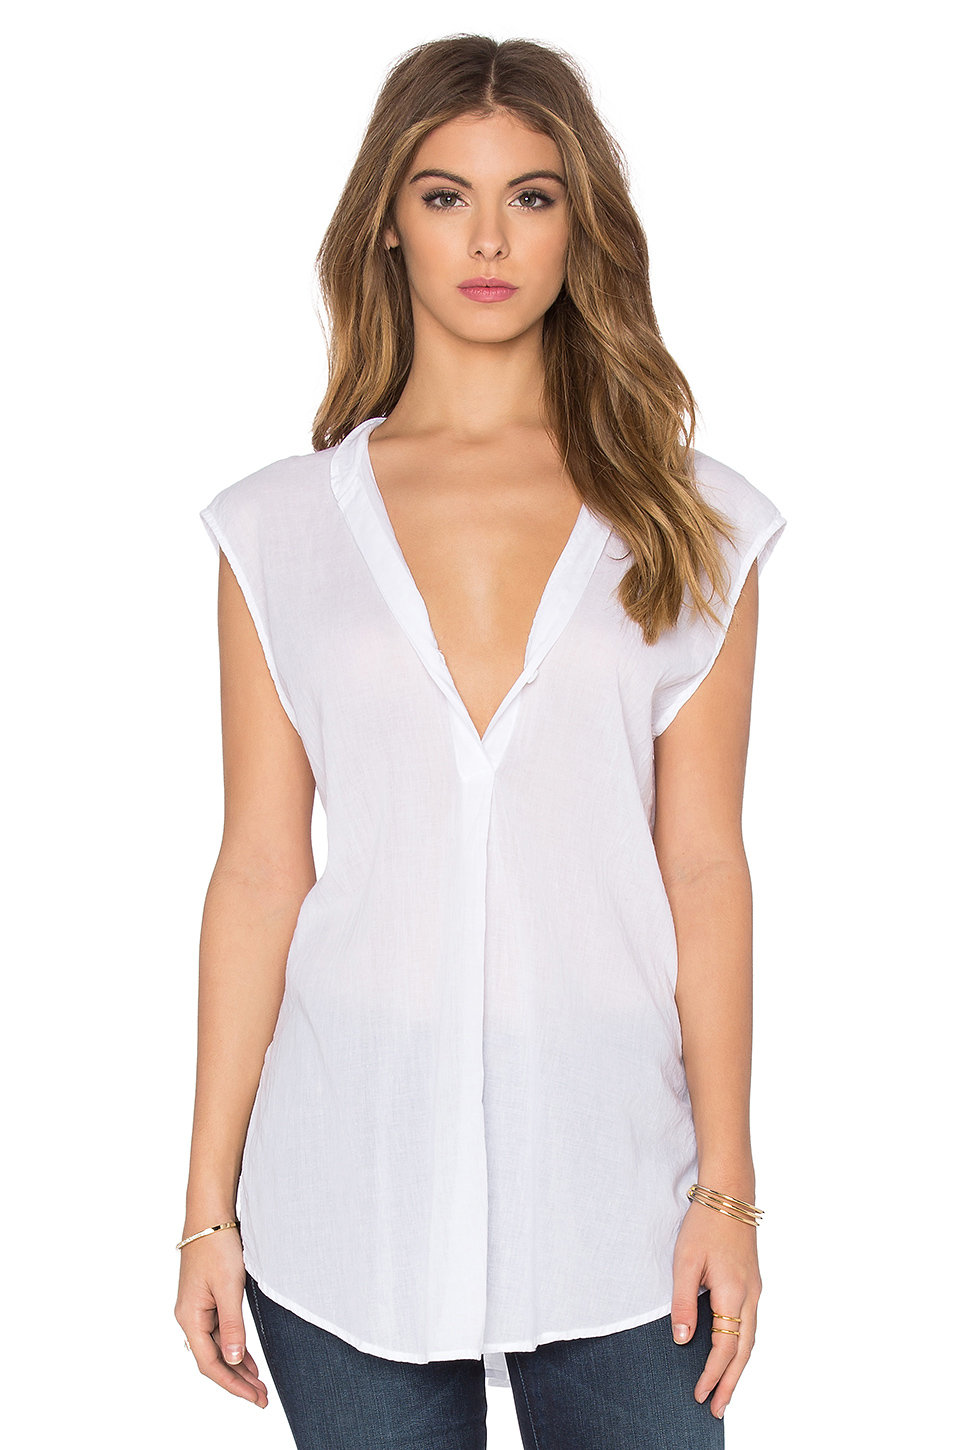 Enza Costa Sleeveless Henley Tunic Top in White - Lyst